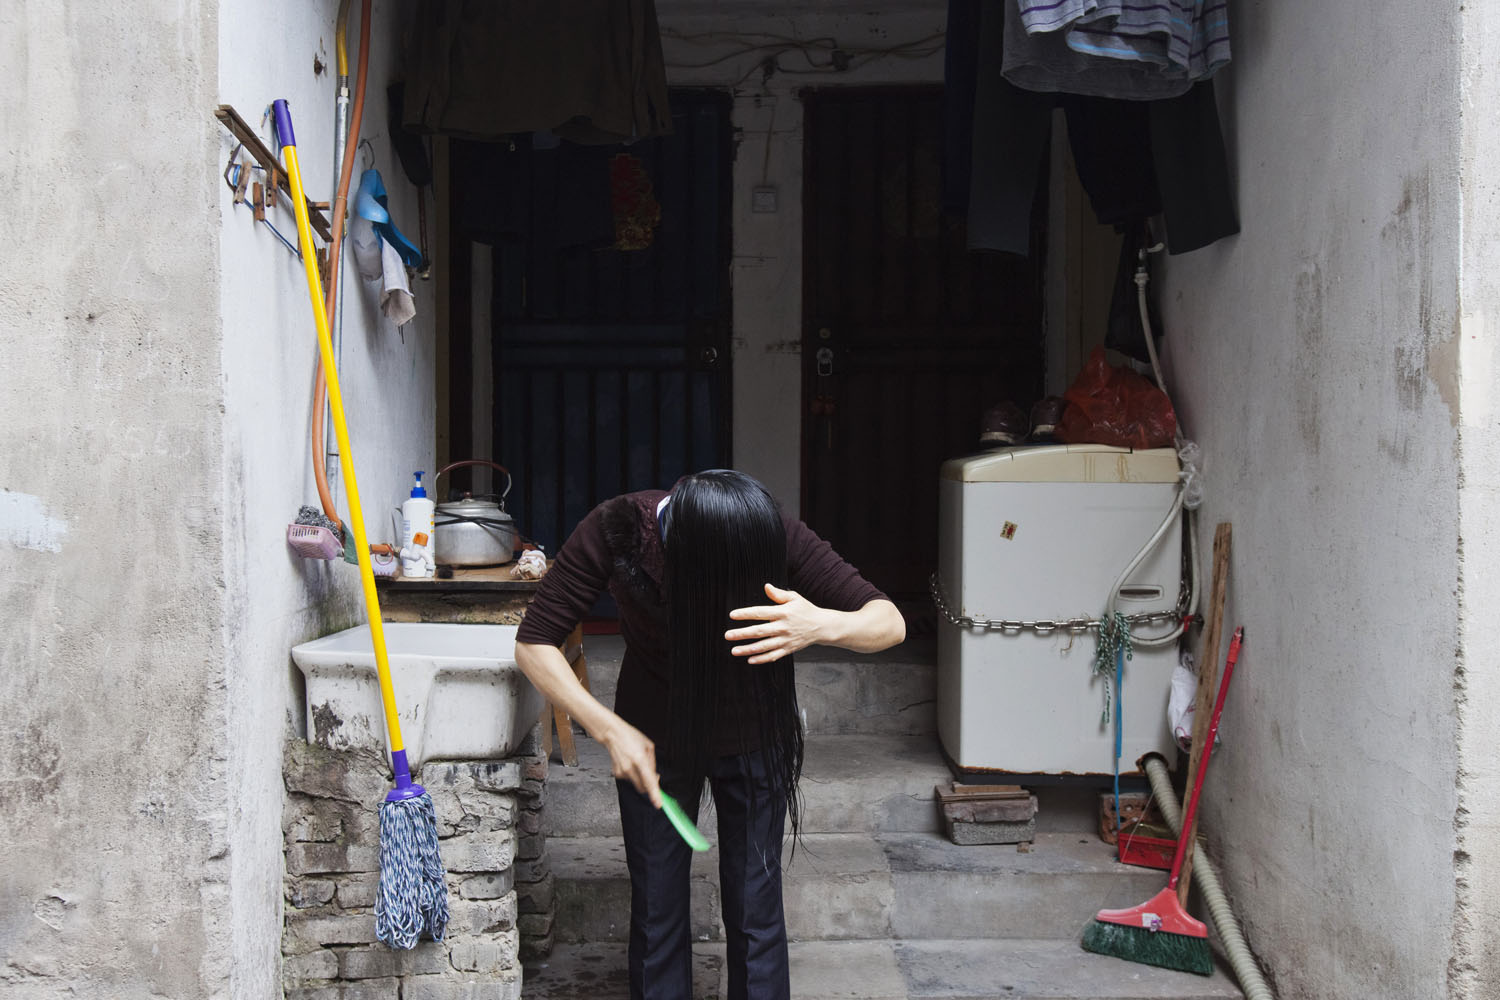 A woman washes and brushes her hair in front of her home. Guangfu Road. Shanghai, China. 2015.